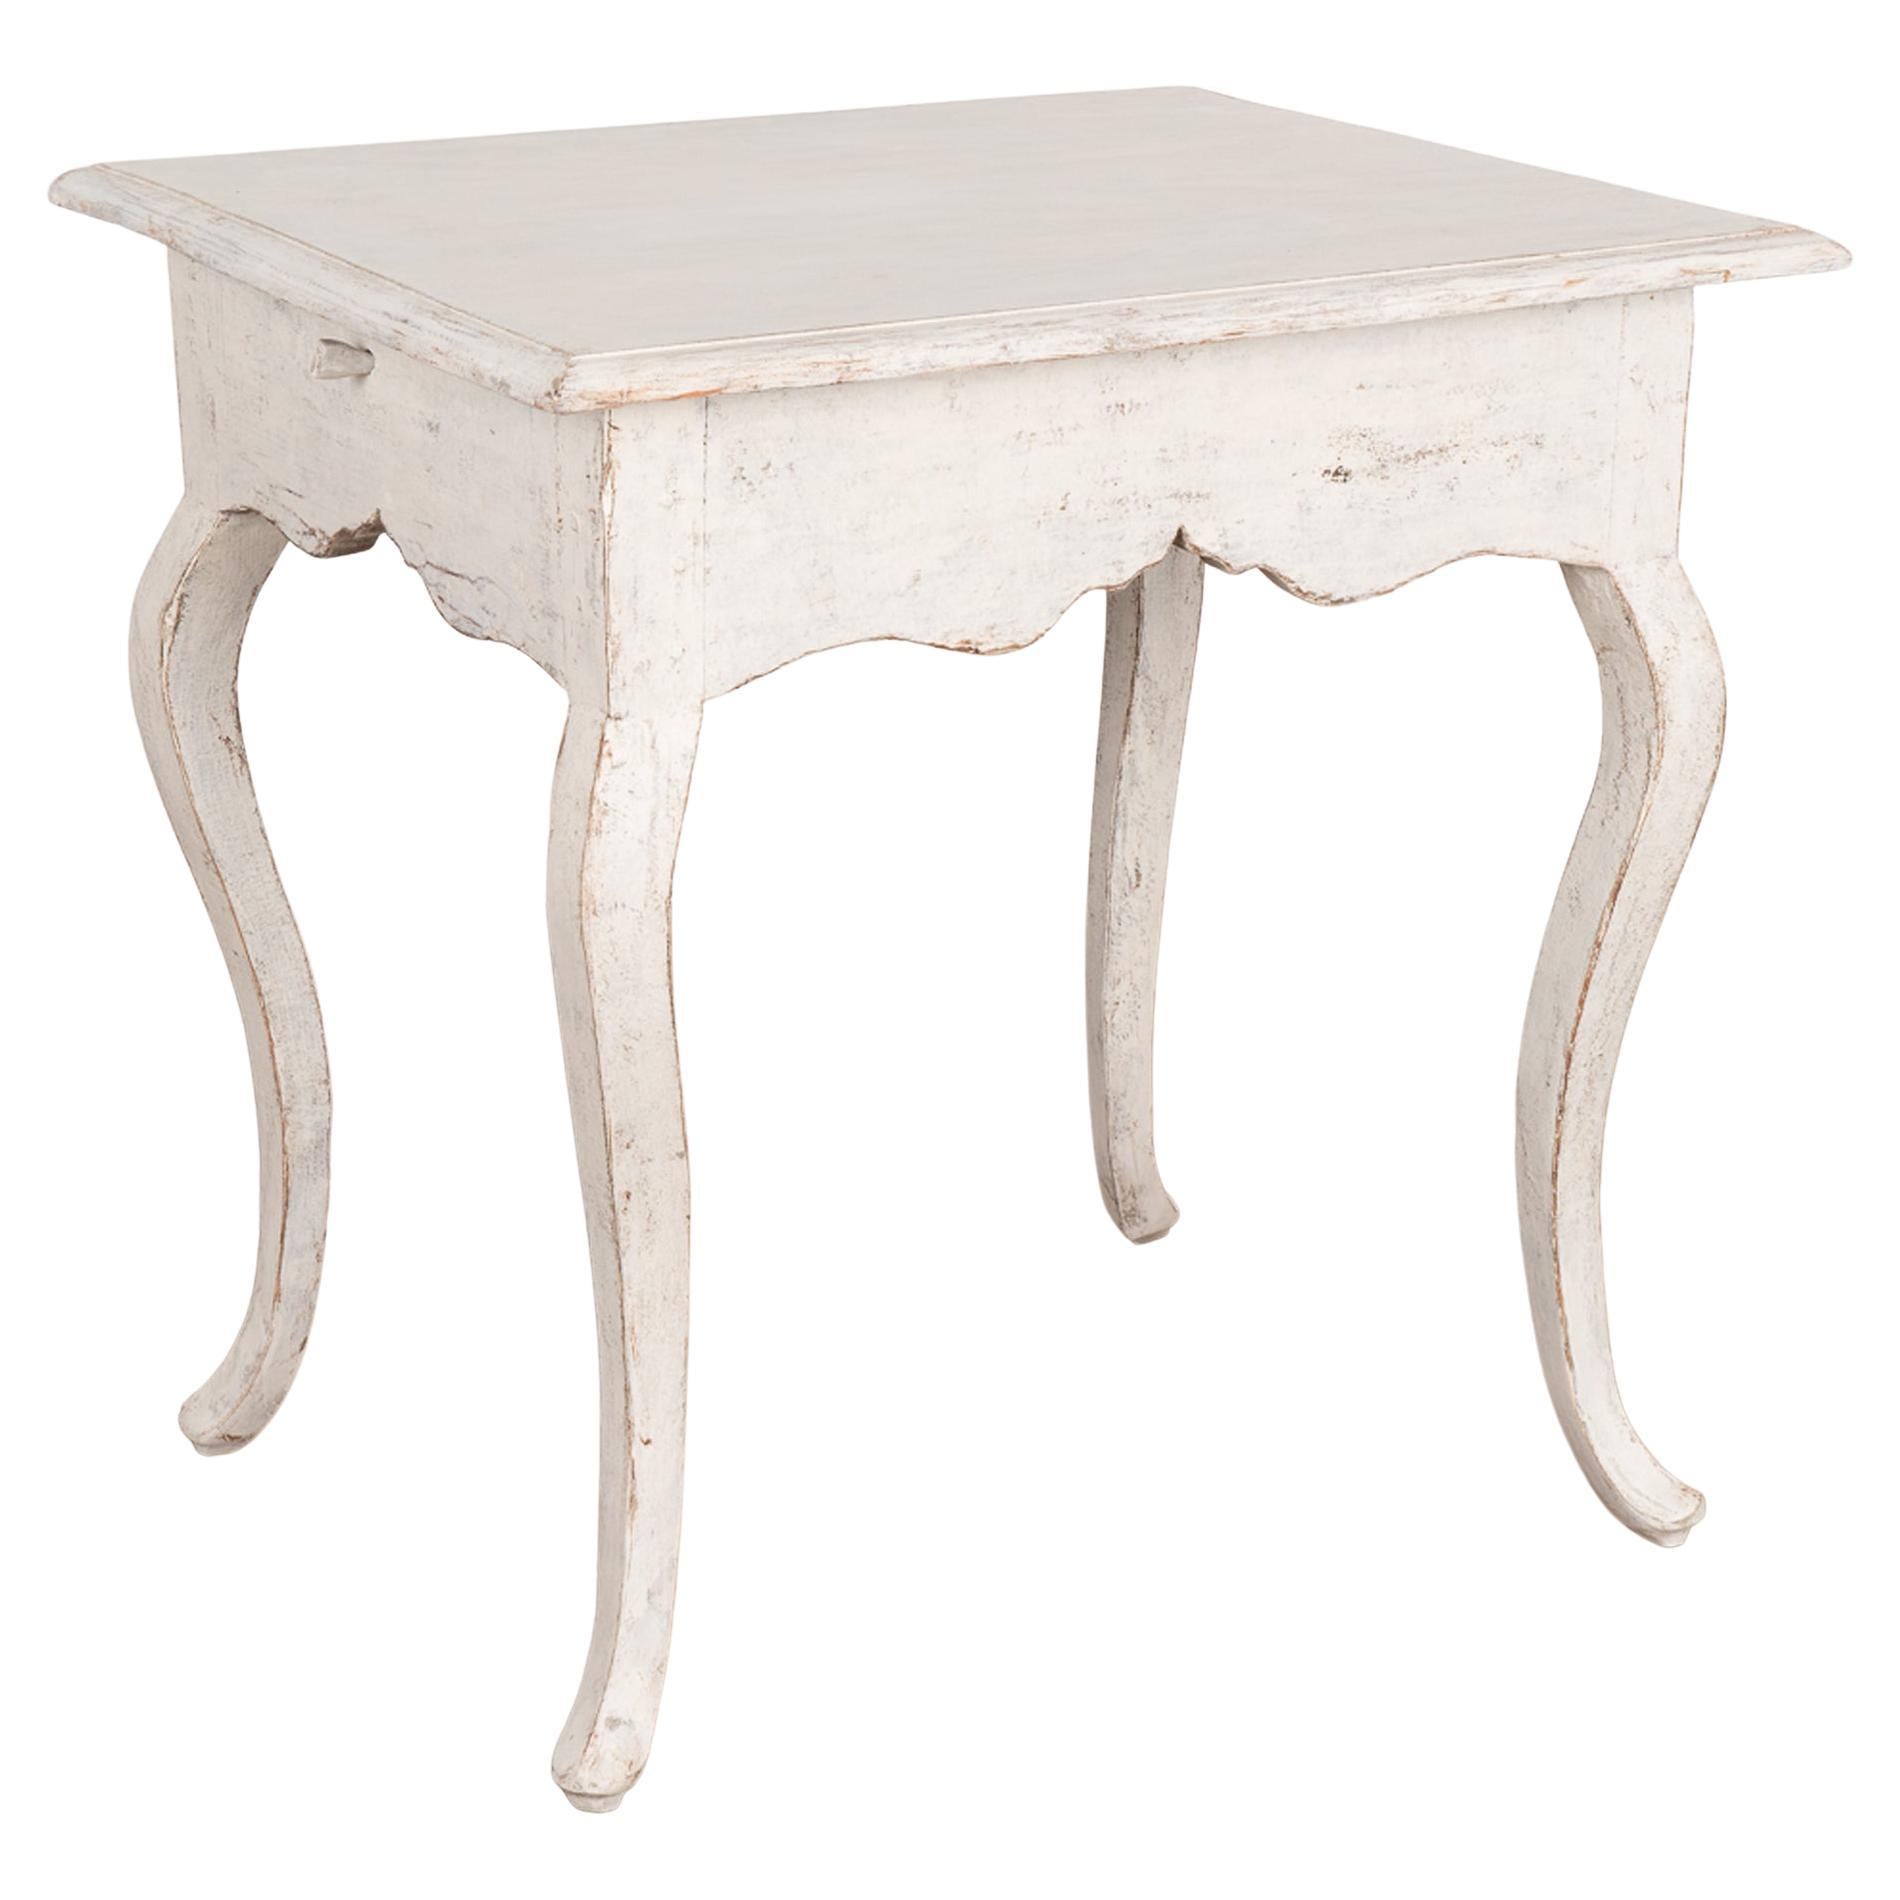 White Gustavian Side Table with Cabriolet Legs, Sweden circa 1800-20